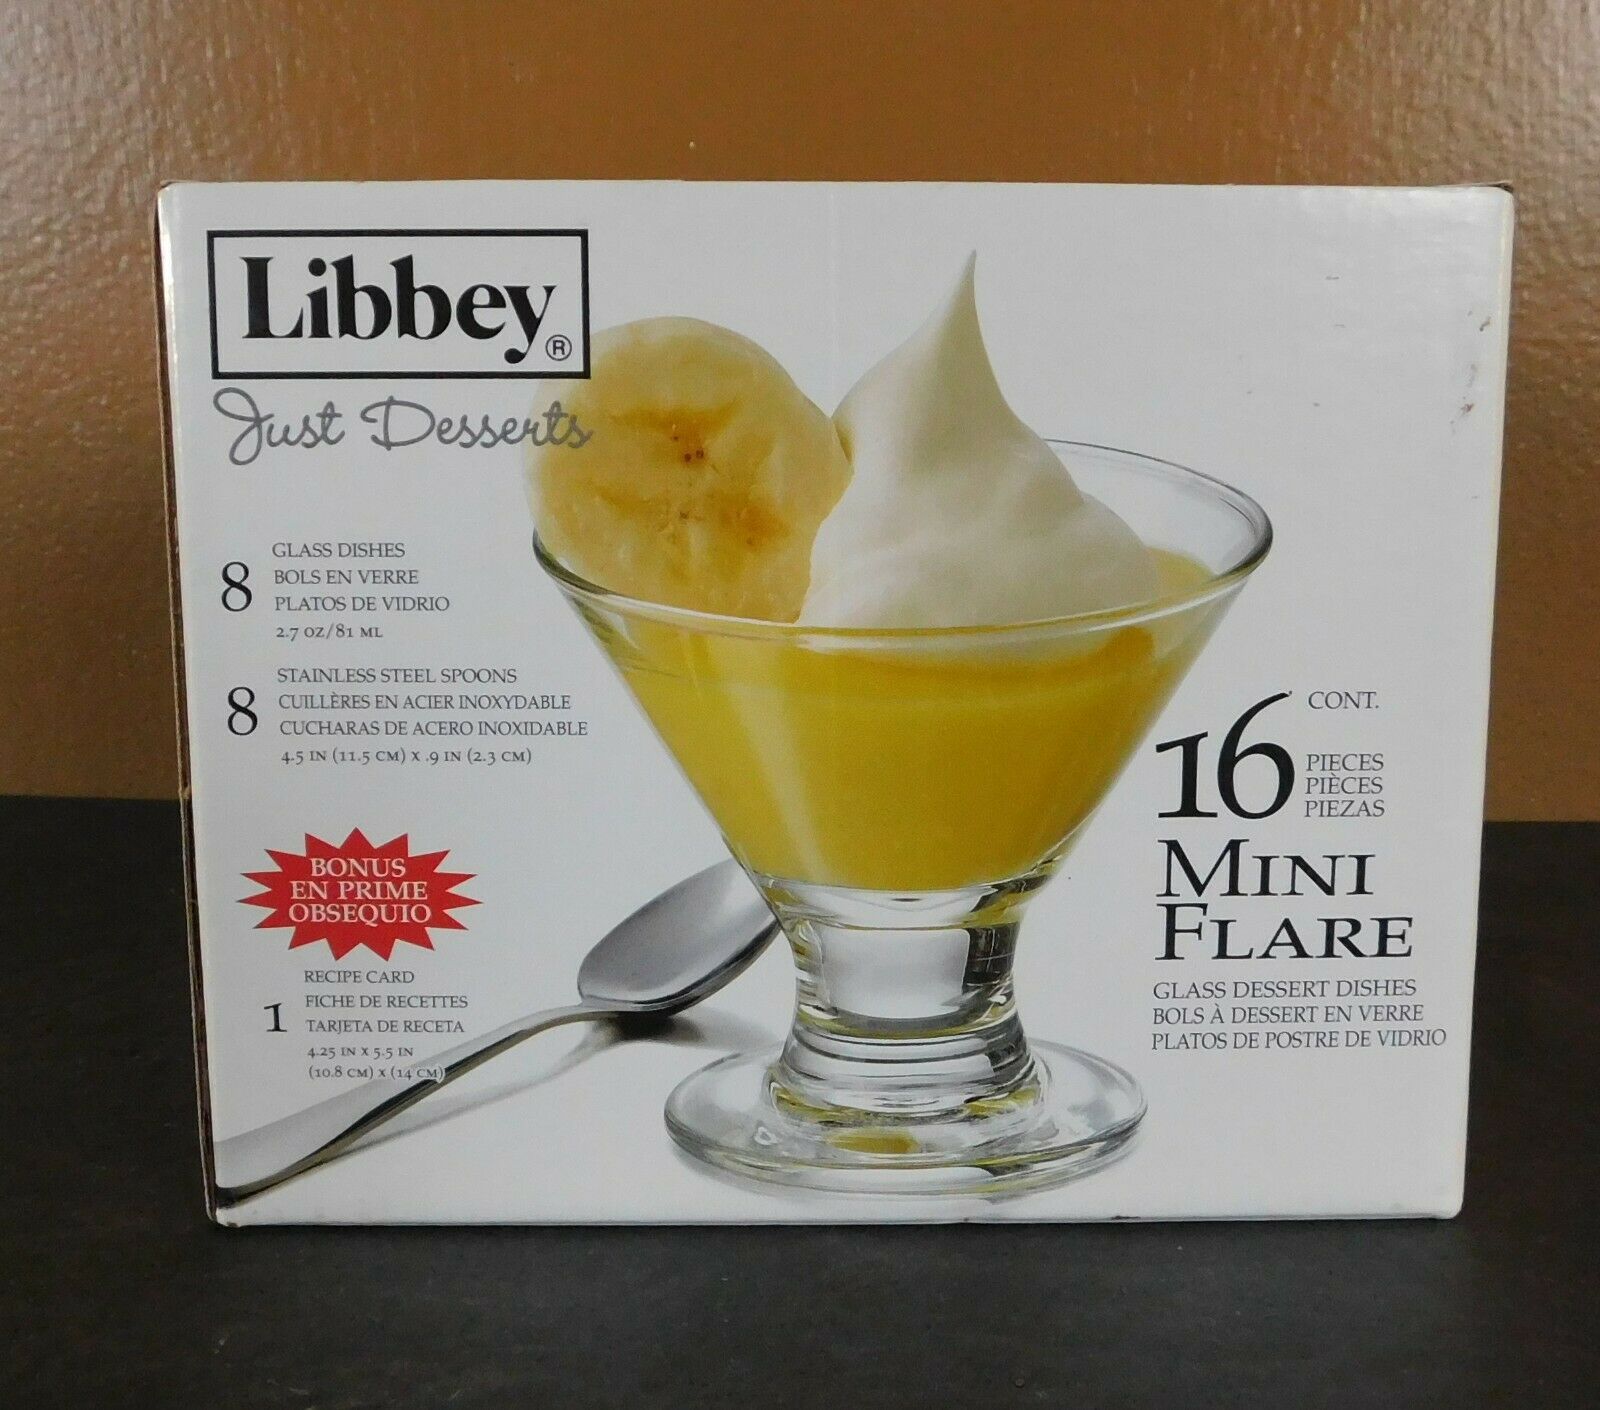 Libbey Just Desserts 16 Piece Mini Flare Glass Bowl Set 8 Flares 8 Spoons